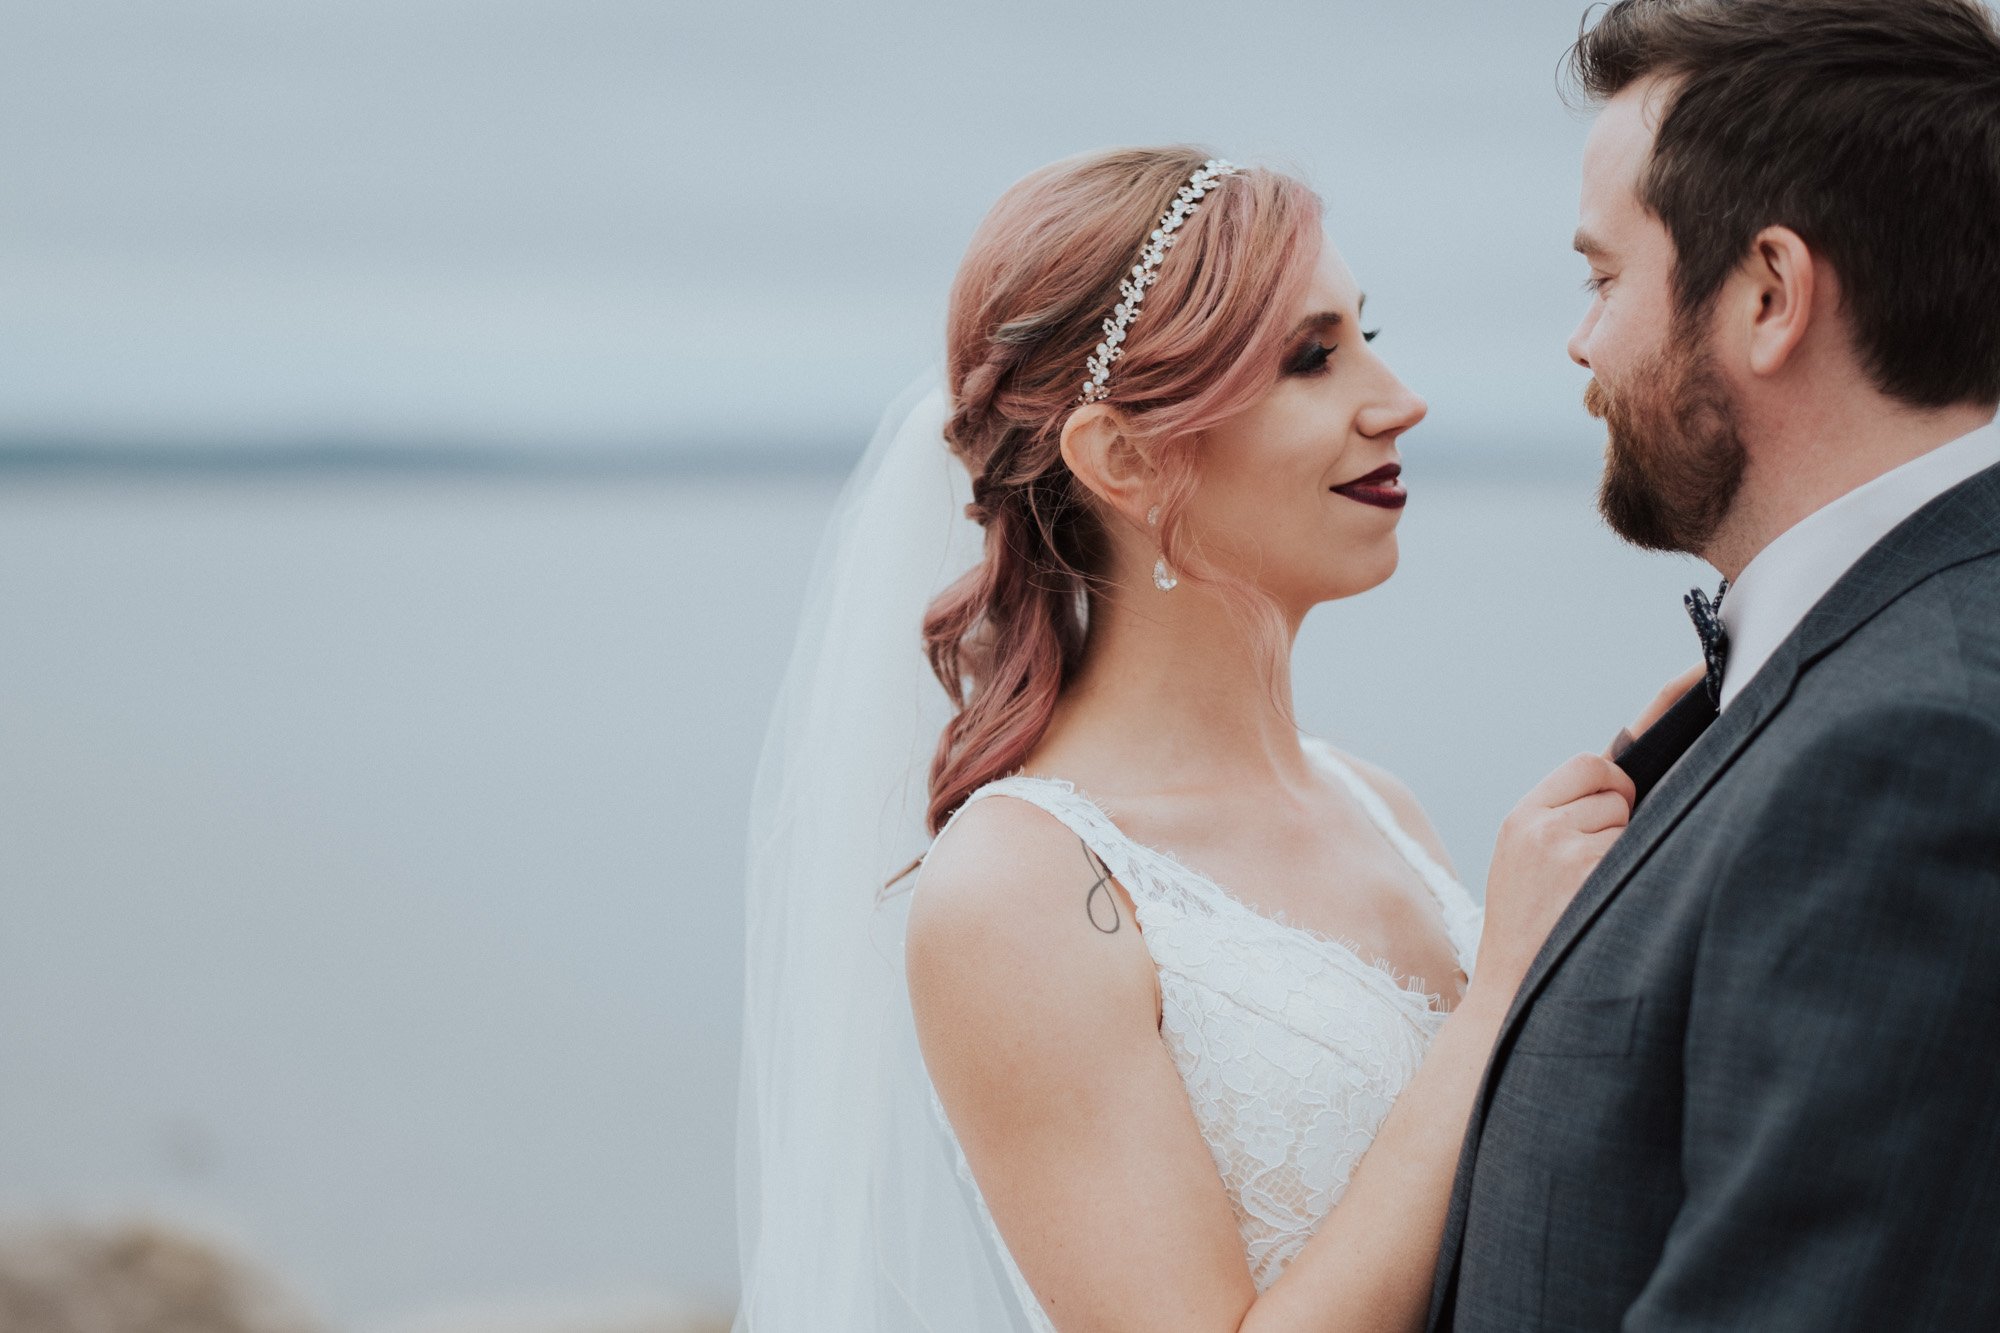 Wild Rosebuds | Shooting a wedding with the Fujifilm X-T20 with the 56mm F1.2 lens 